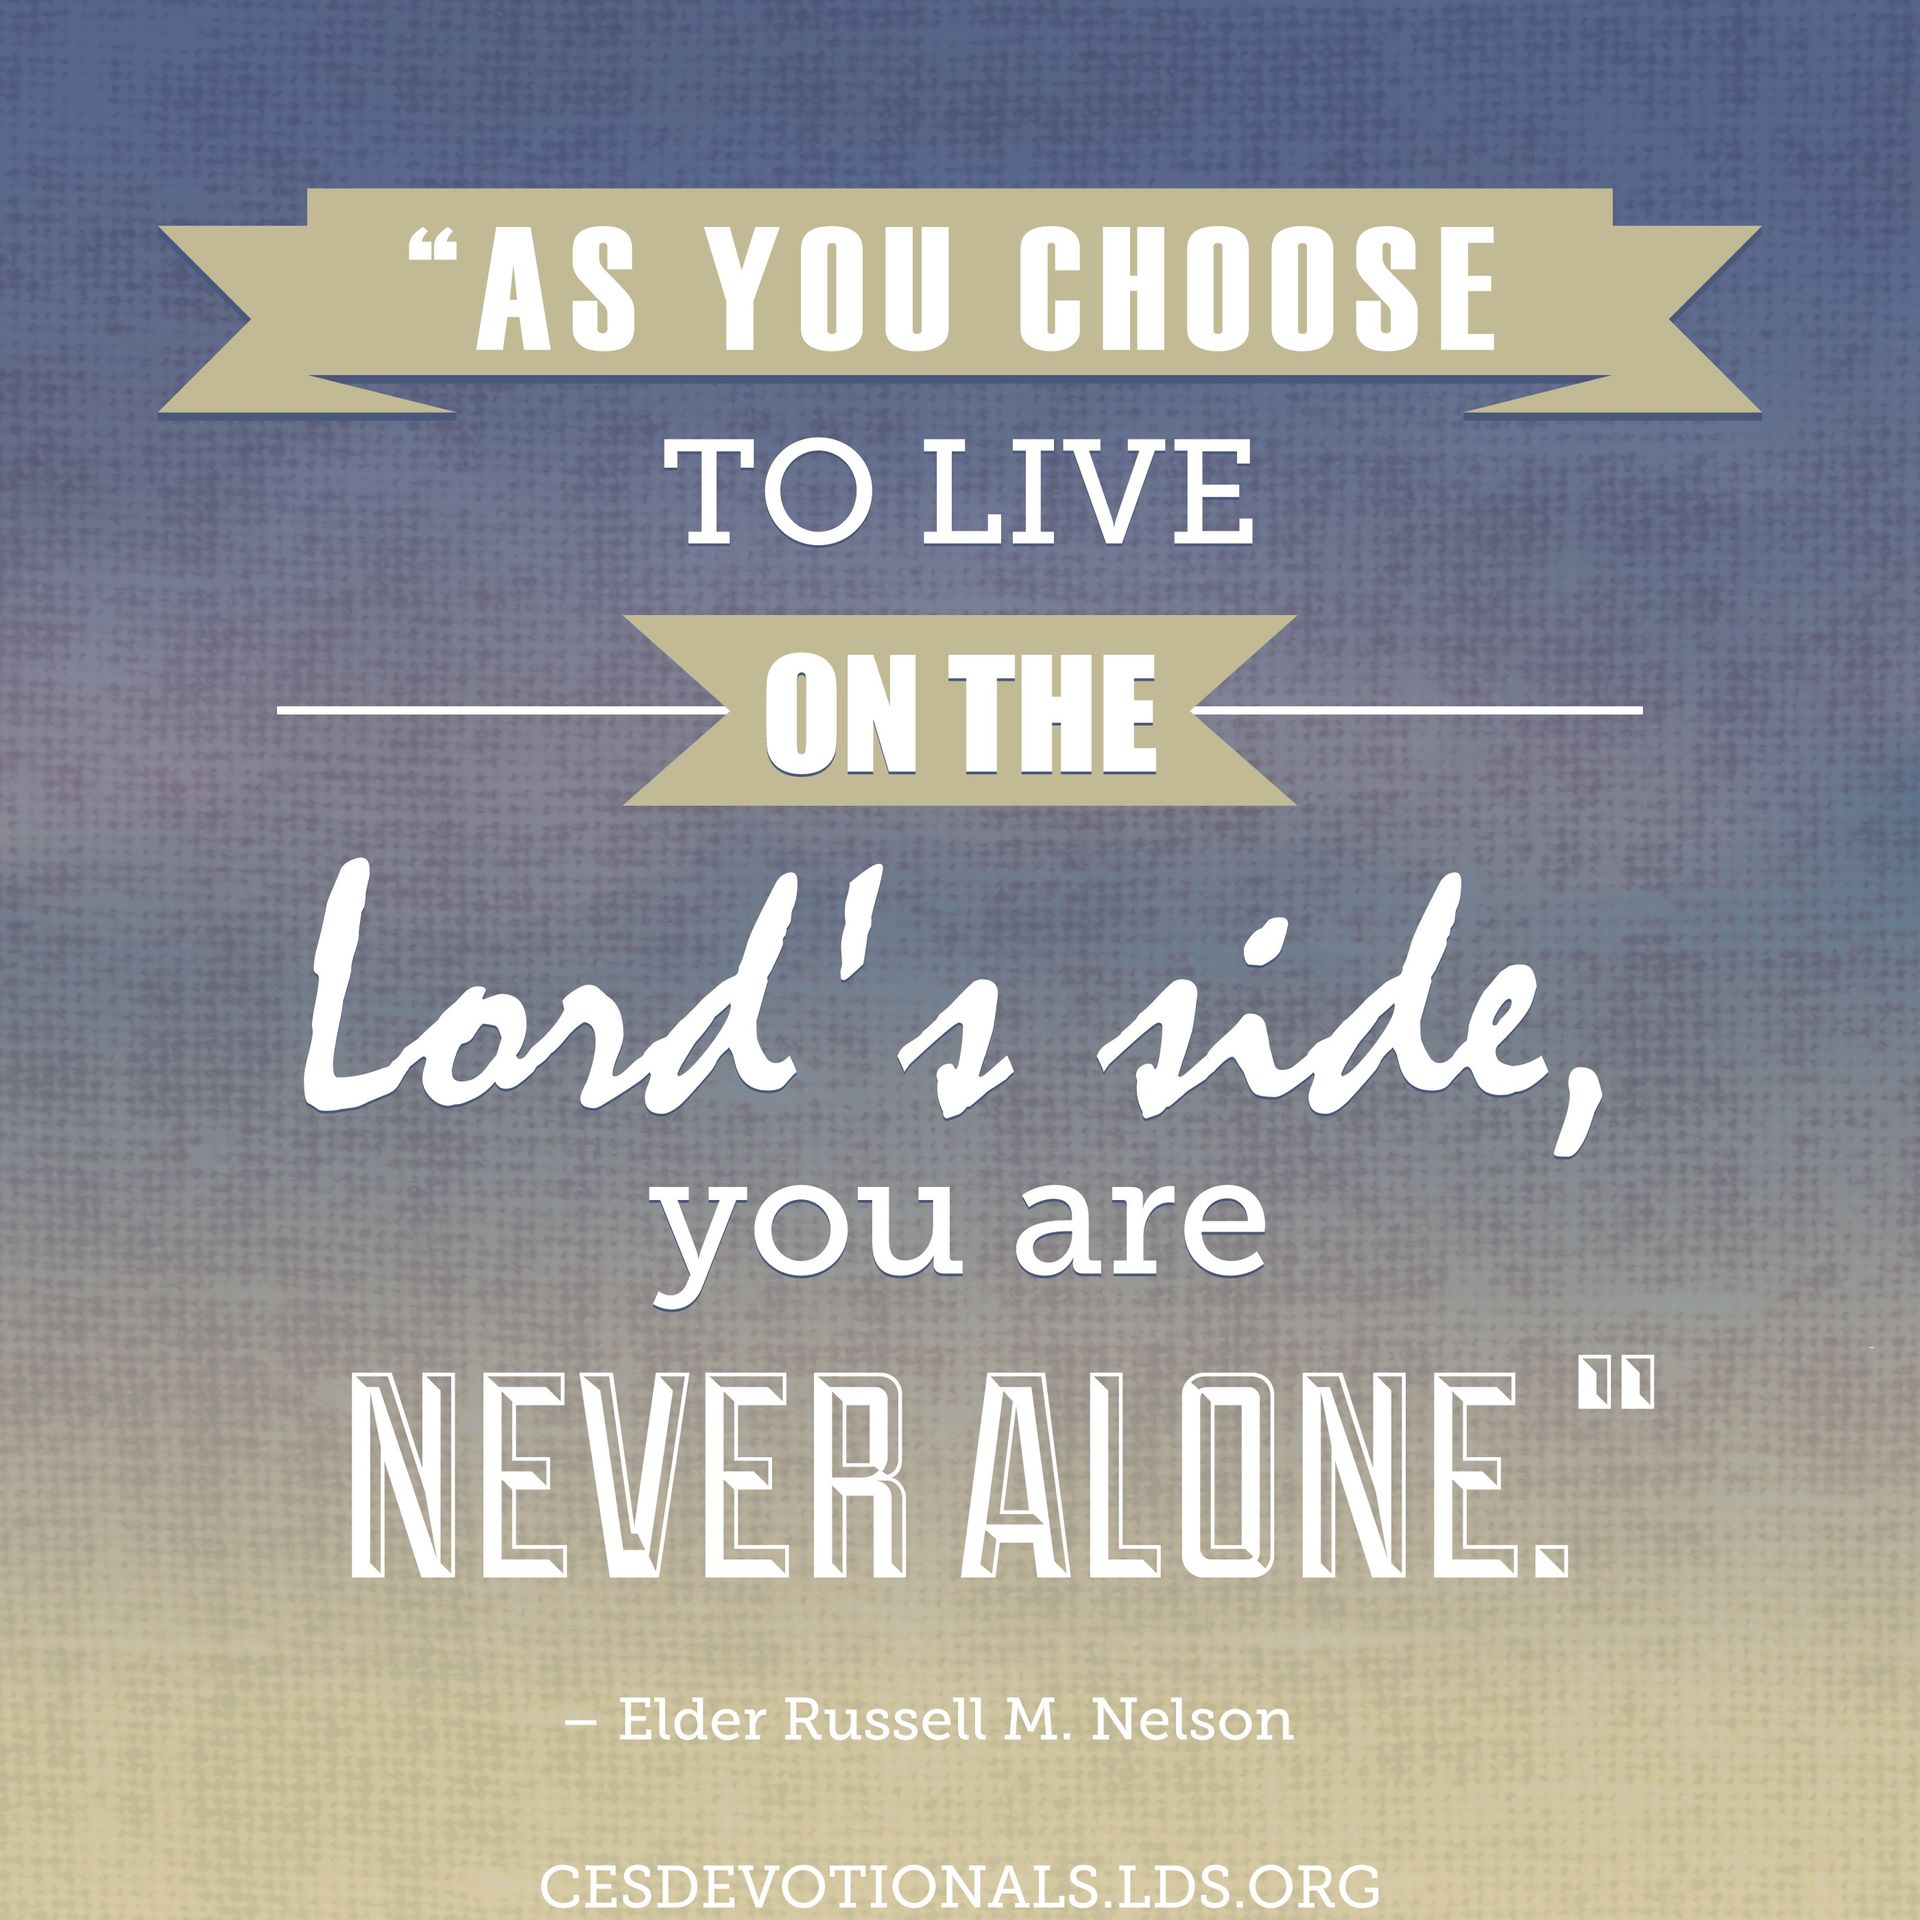 “As you choose to live on the Lord’s side, you are never alone.”—President Russell M. Nelson, “Youth of the Noble Birthright: What Will You Choose?” © undefined ipCode 1.